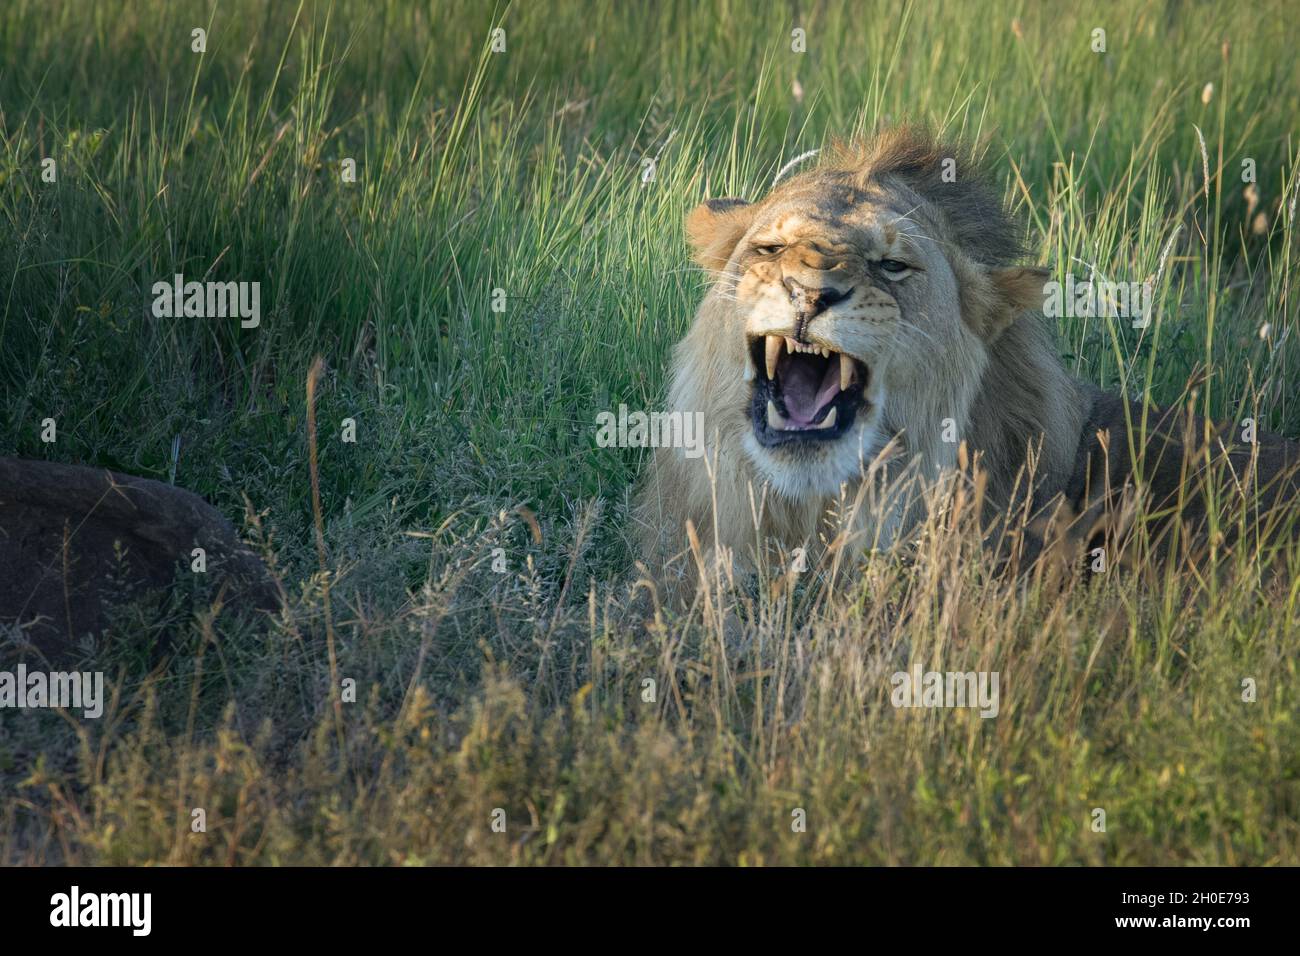 Across Africa lion population is dwindling rapidly. In Mid-1980s population was estimated at 200,000. Today it is 17,000 or less and declining. Stock Photo